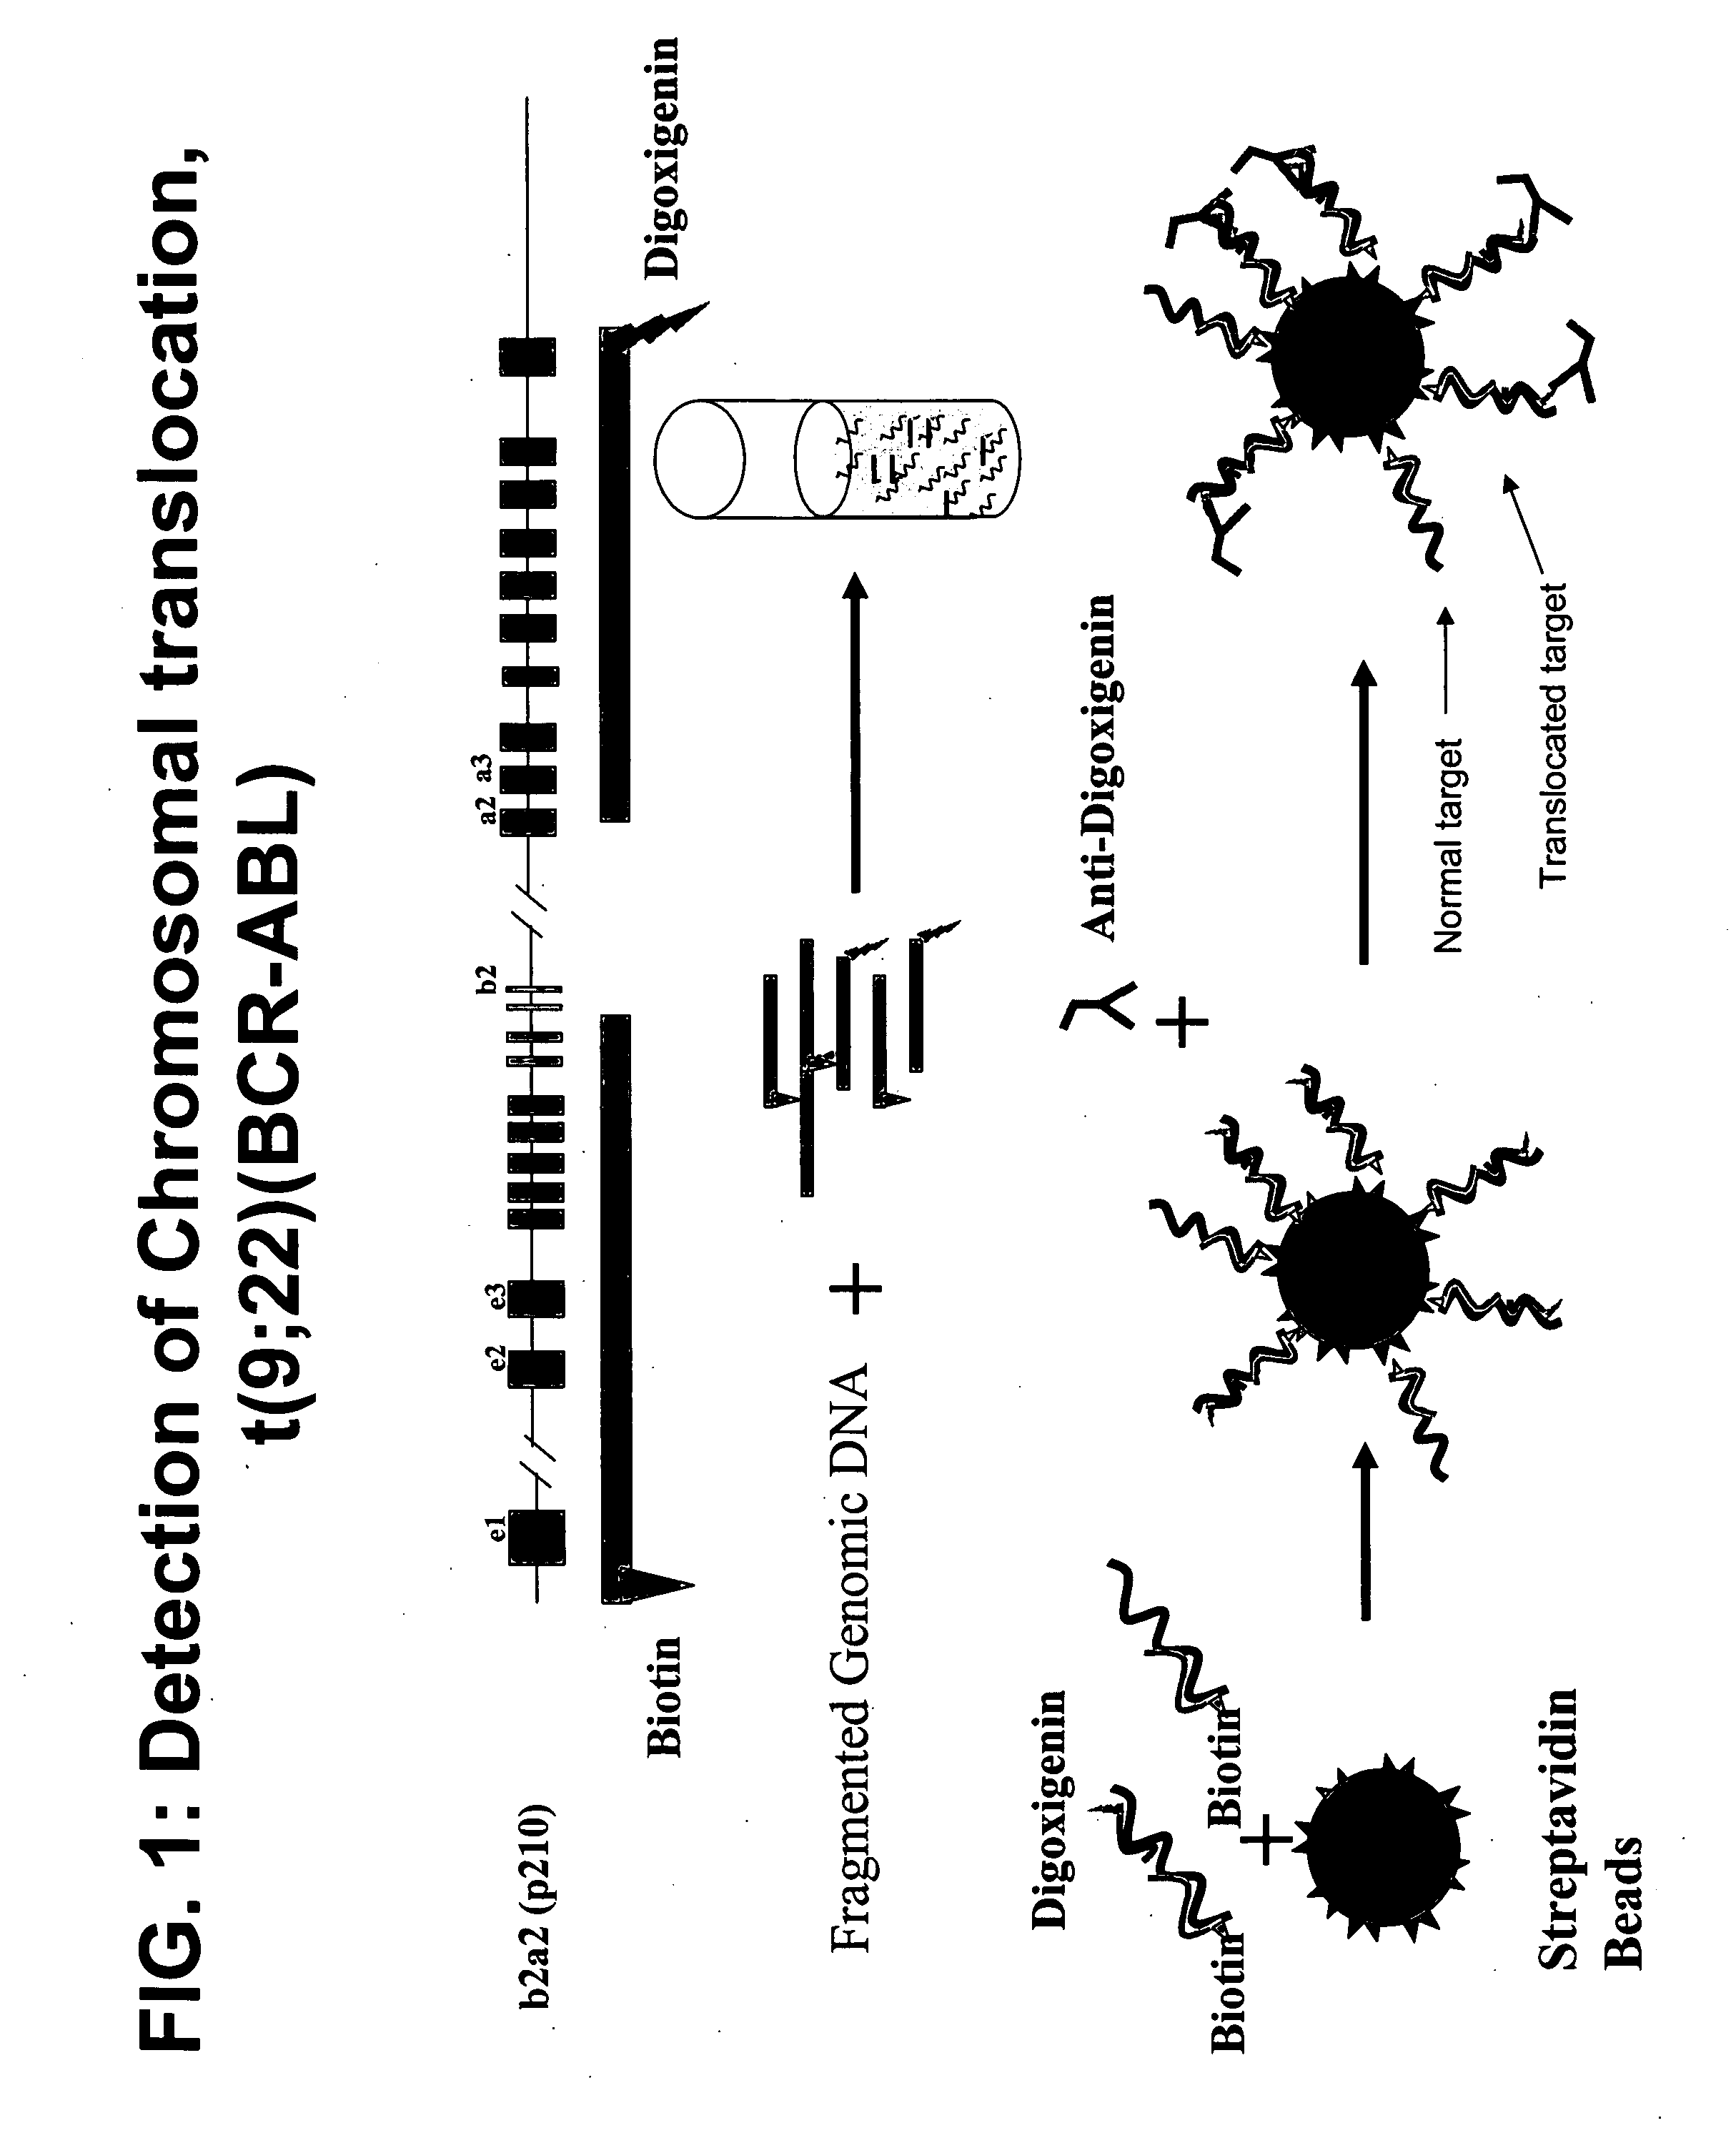 Non-in situ hybridization method for detecting chromosomal abnormalities